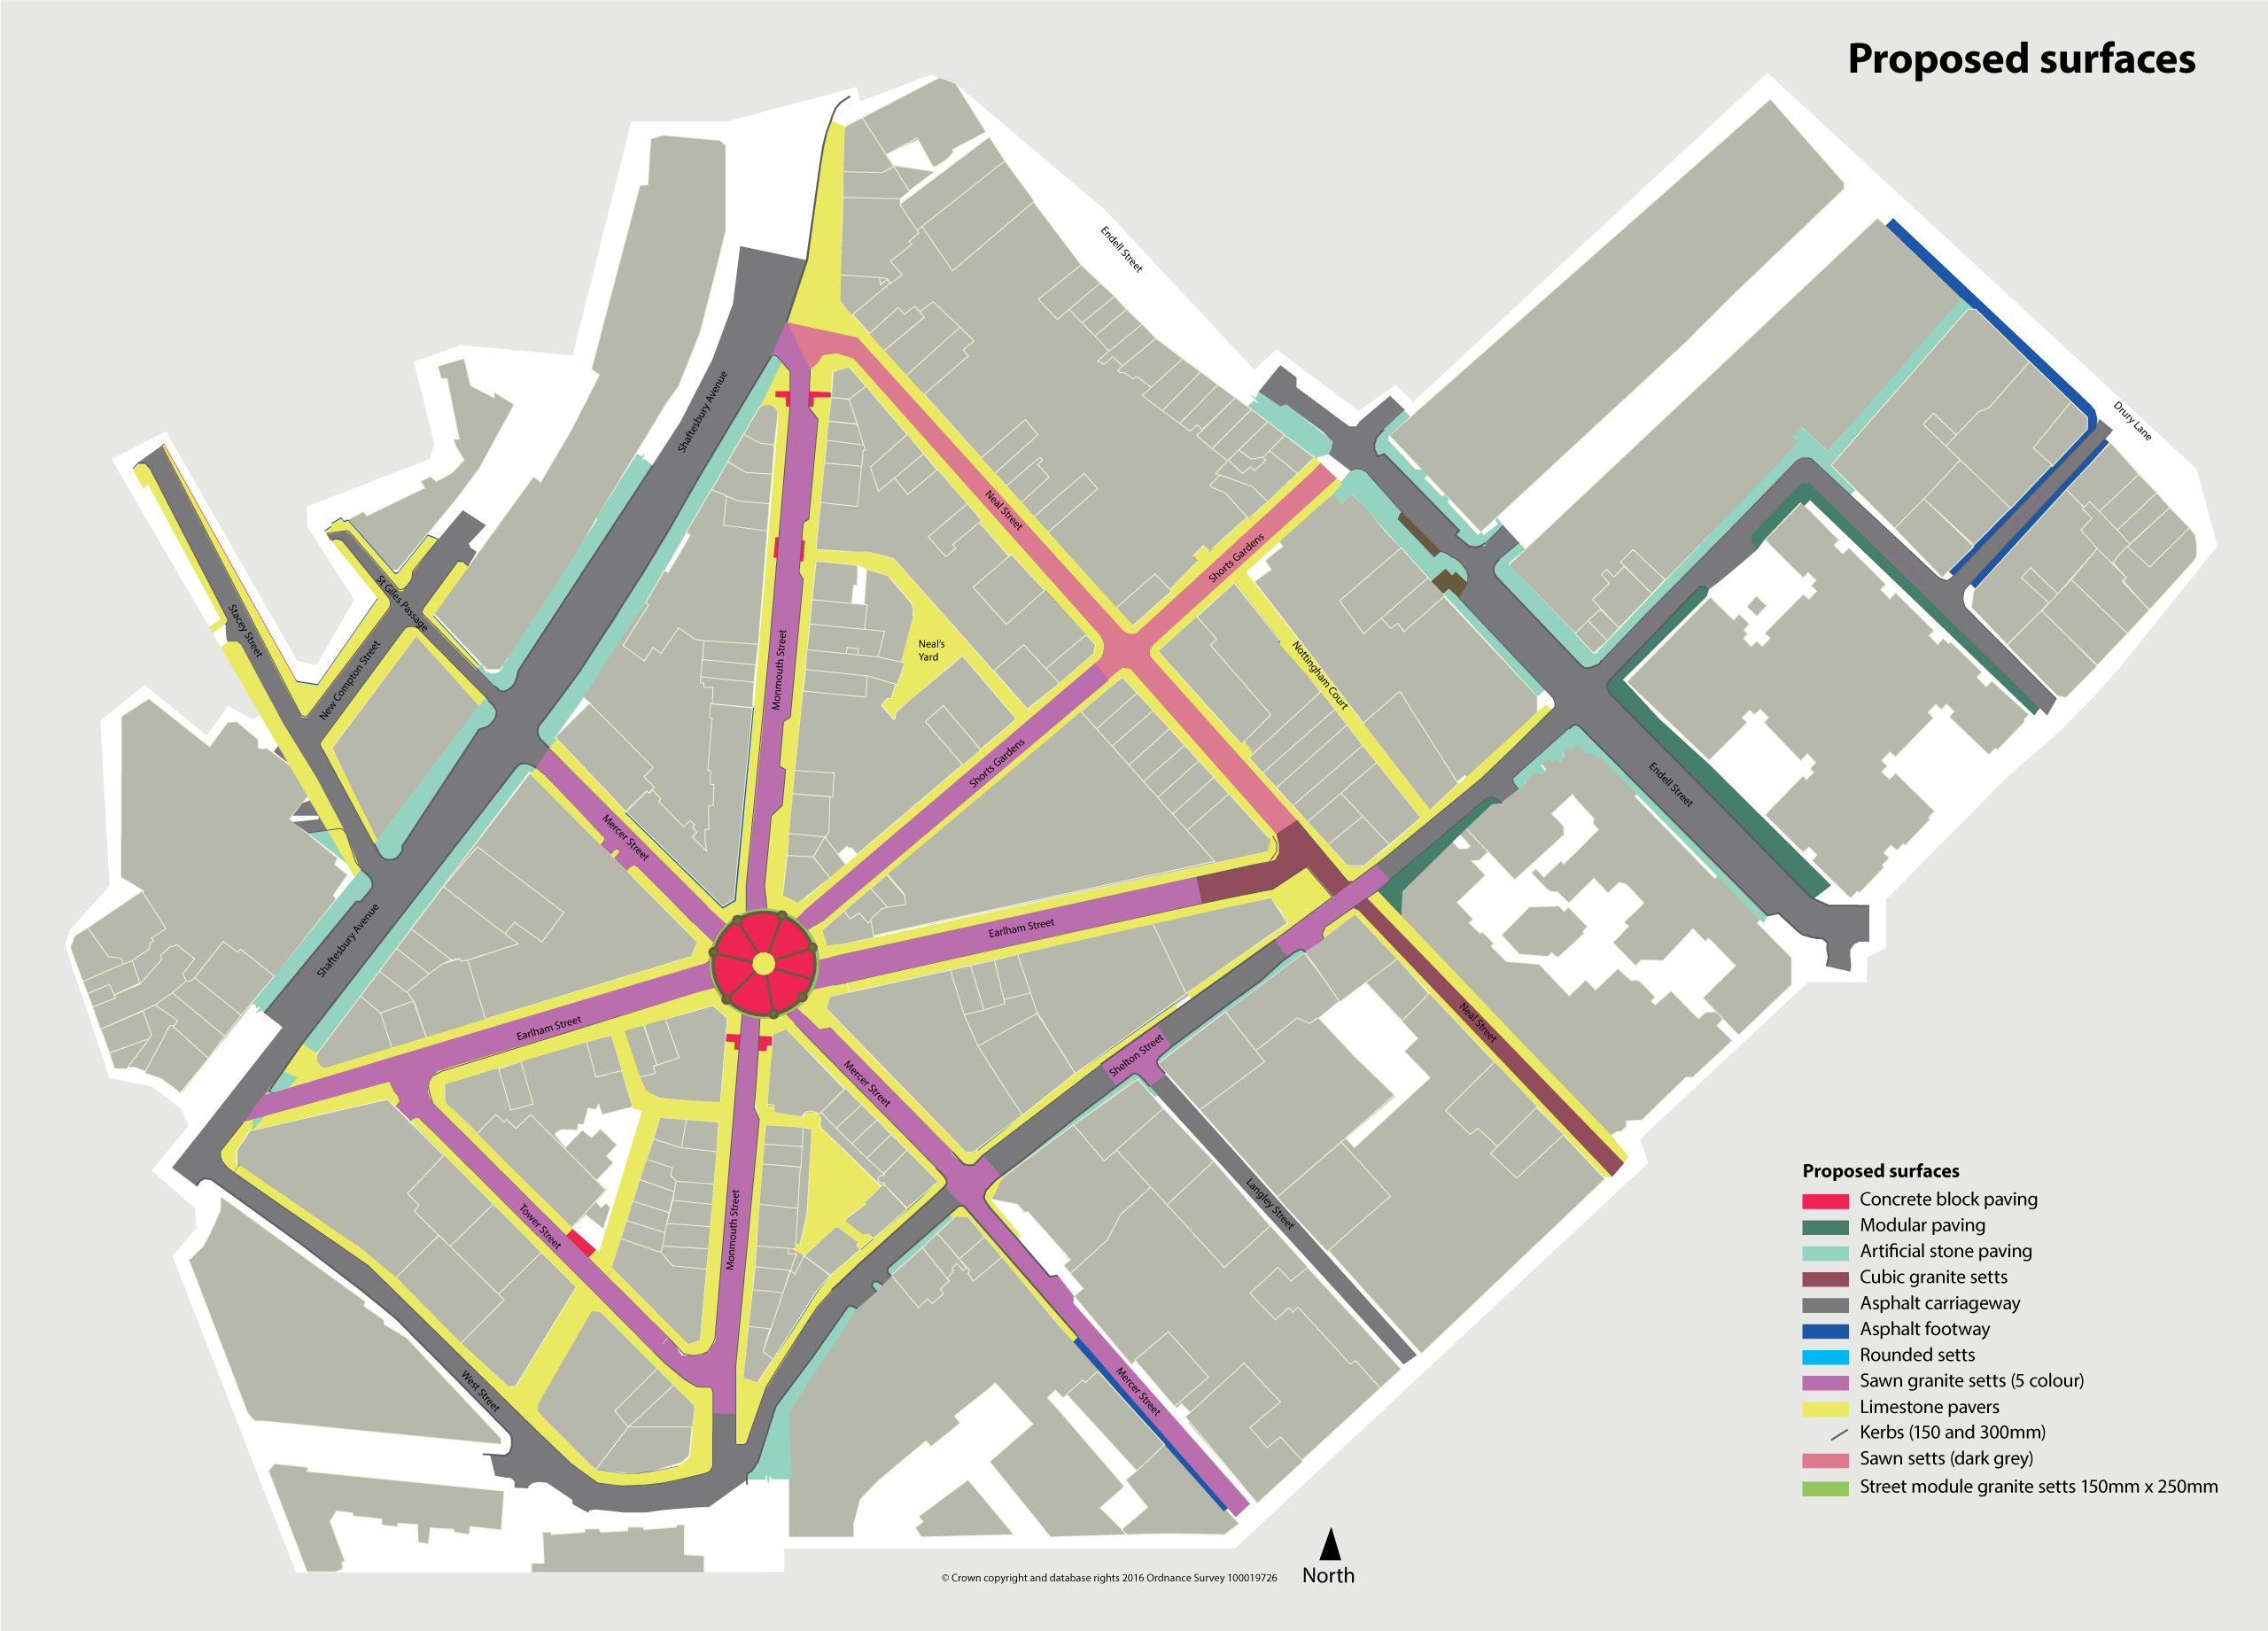 Diagram showing proposed street finishes in core Seven Dials area